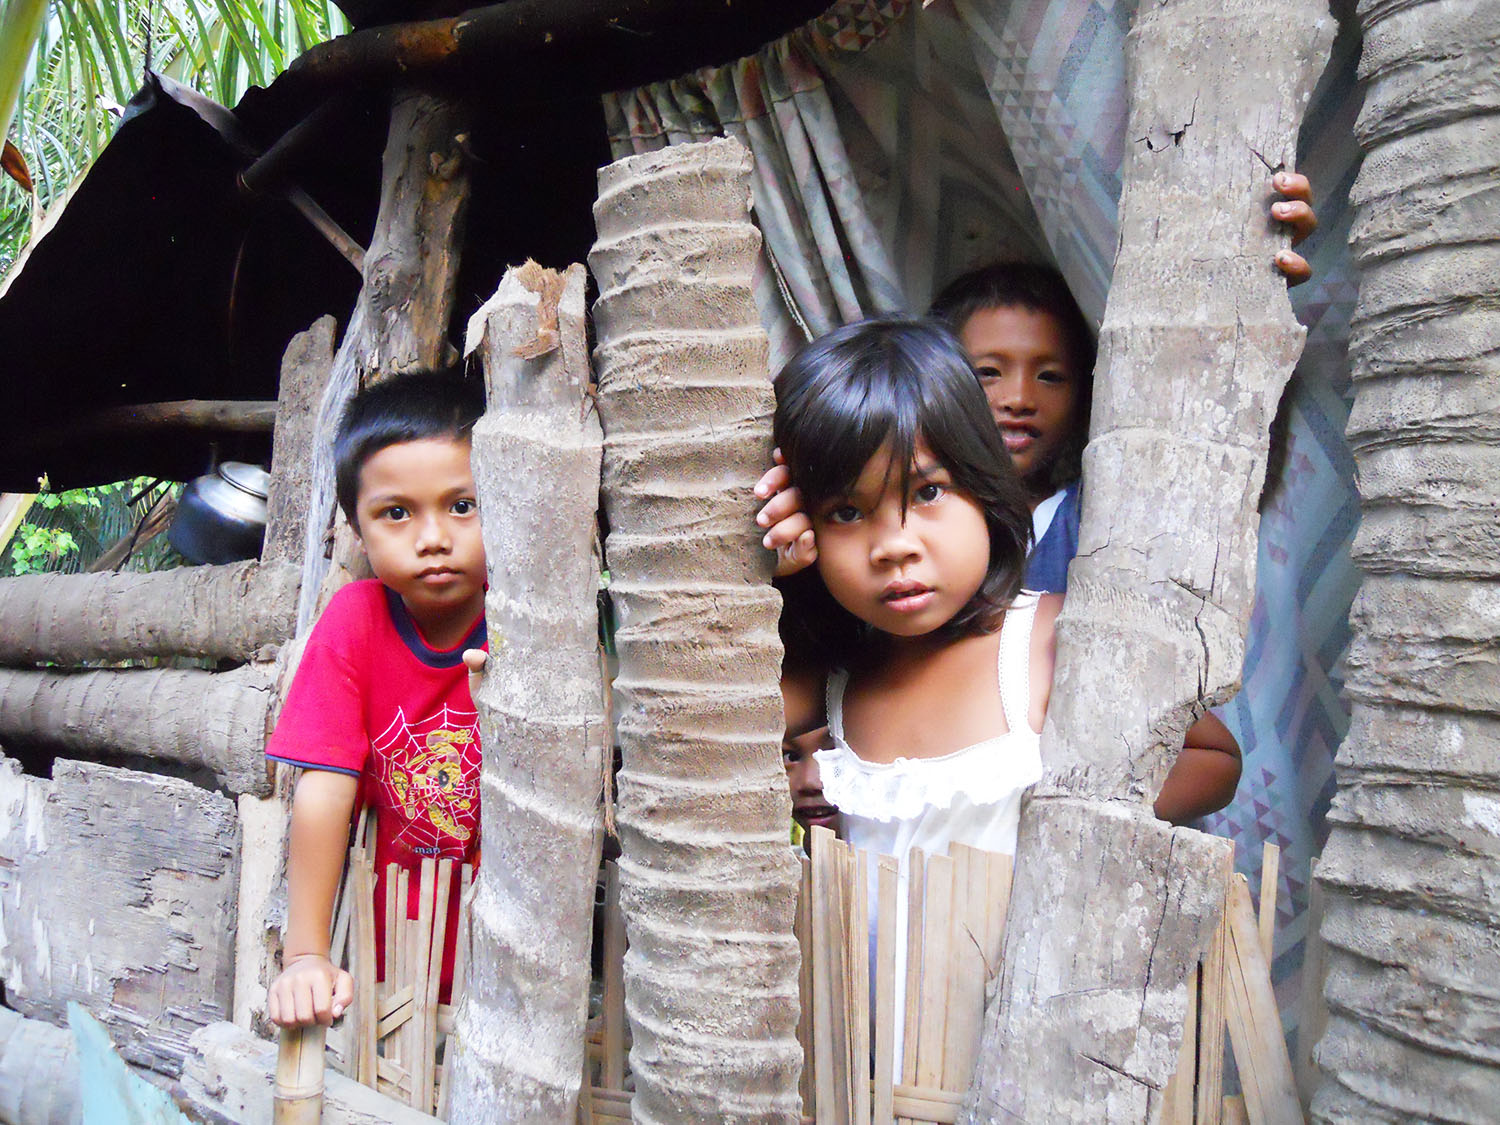 Children, who were in ABC school in Davao during its years of operation, peeping through the cracks of their house